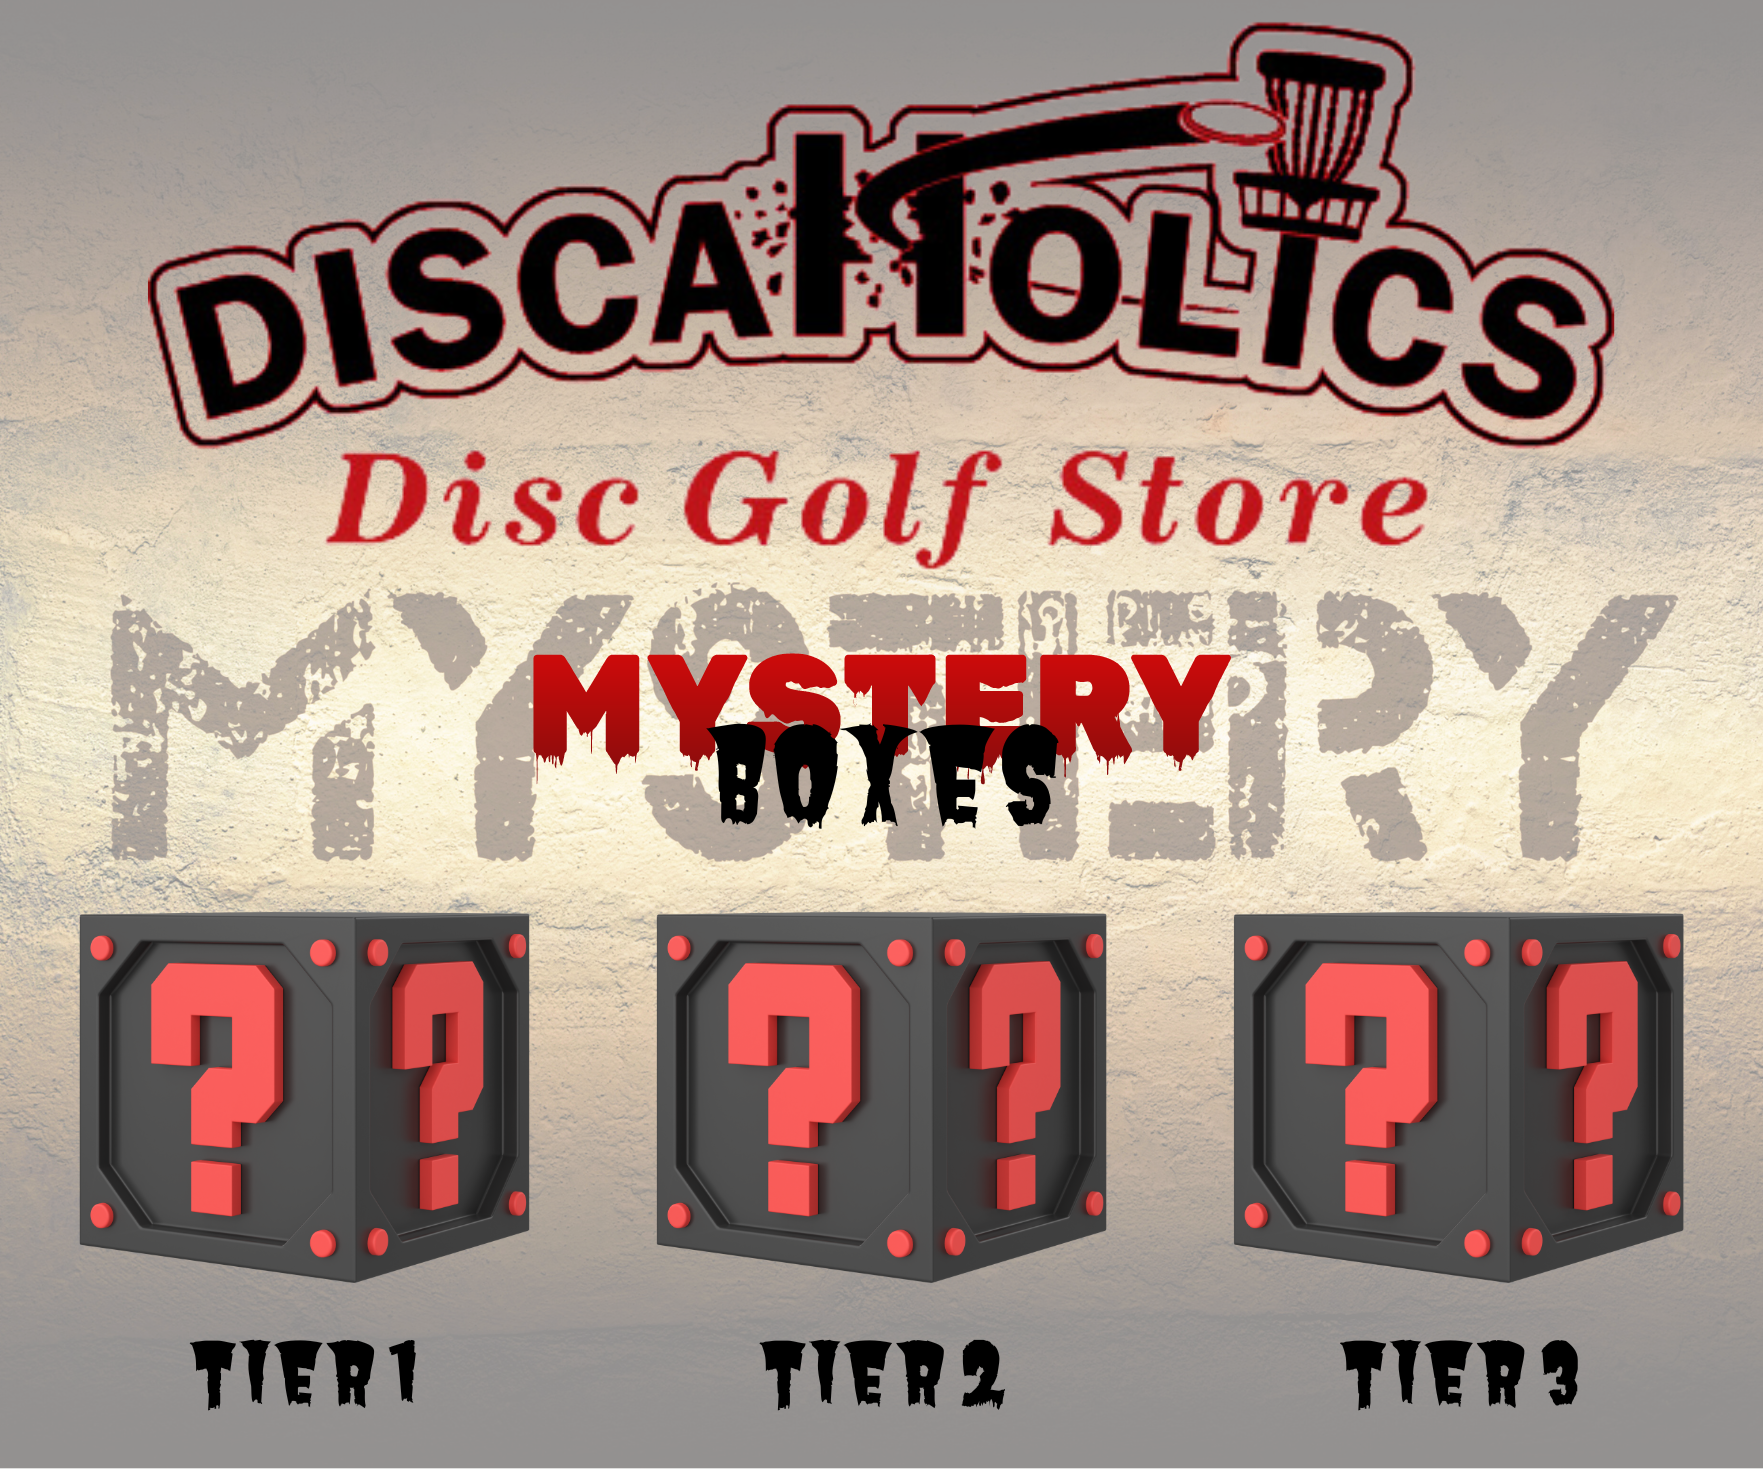 DiscaHolics Mystery Boxes Coming Soon!